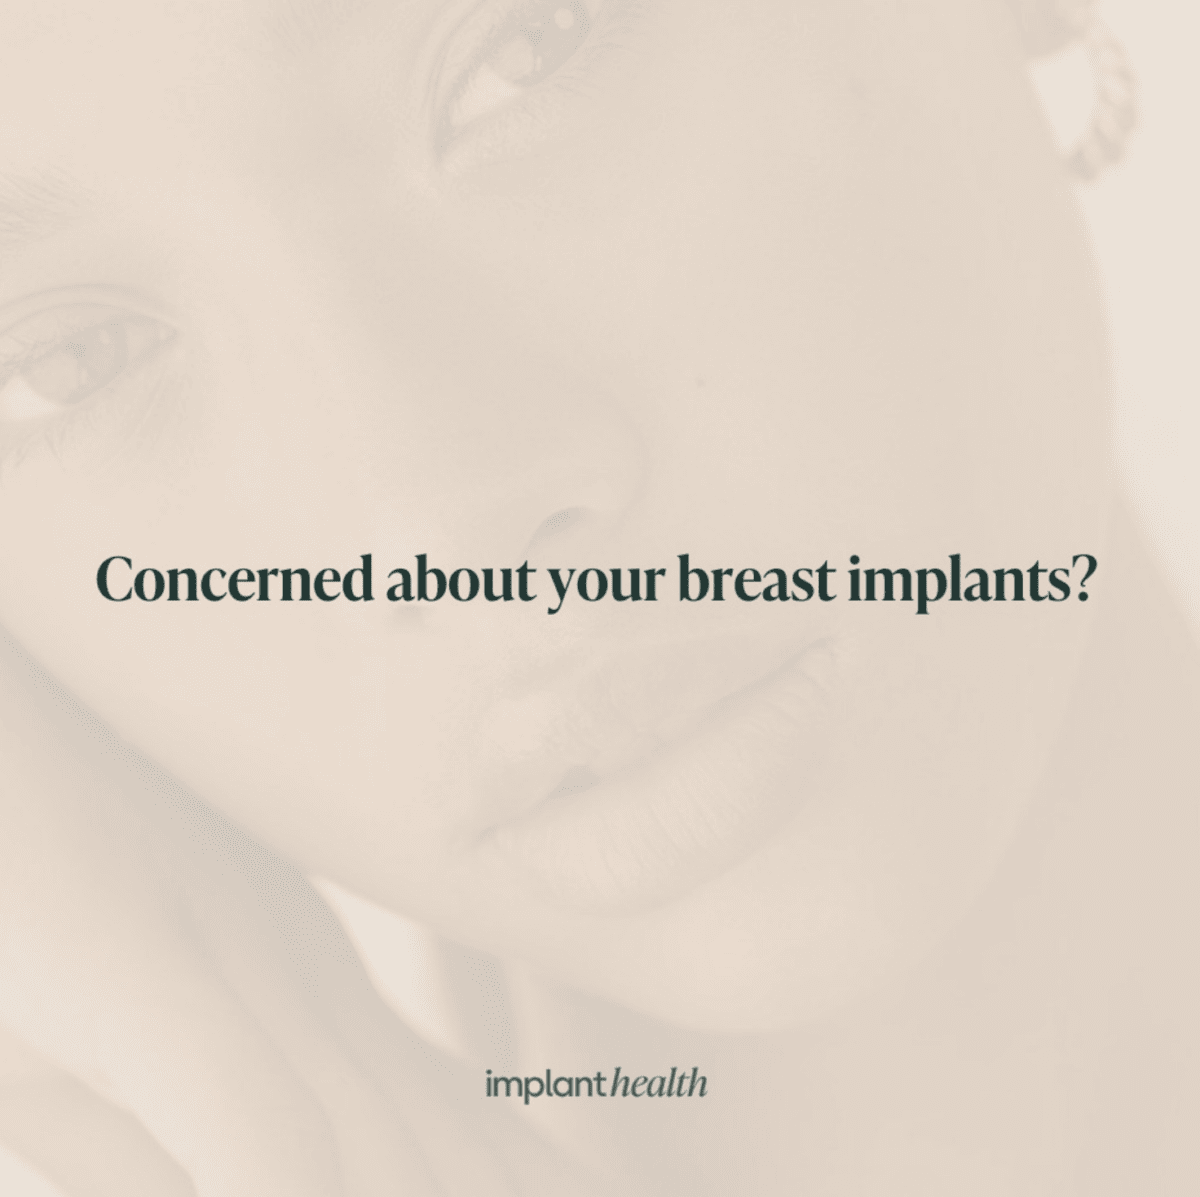 Implant Health gives patients access to personalised breast health screenings, with only the very best surgeons, and radiologists to ensure the highest standards of excellence.